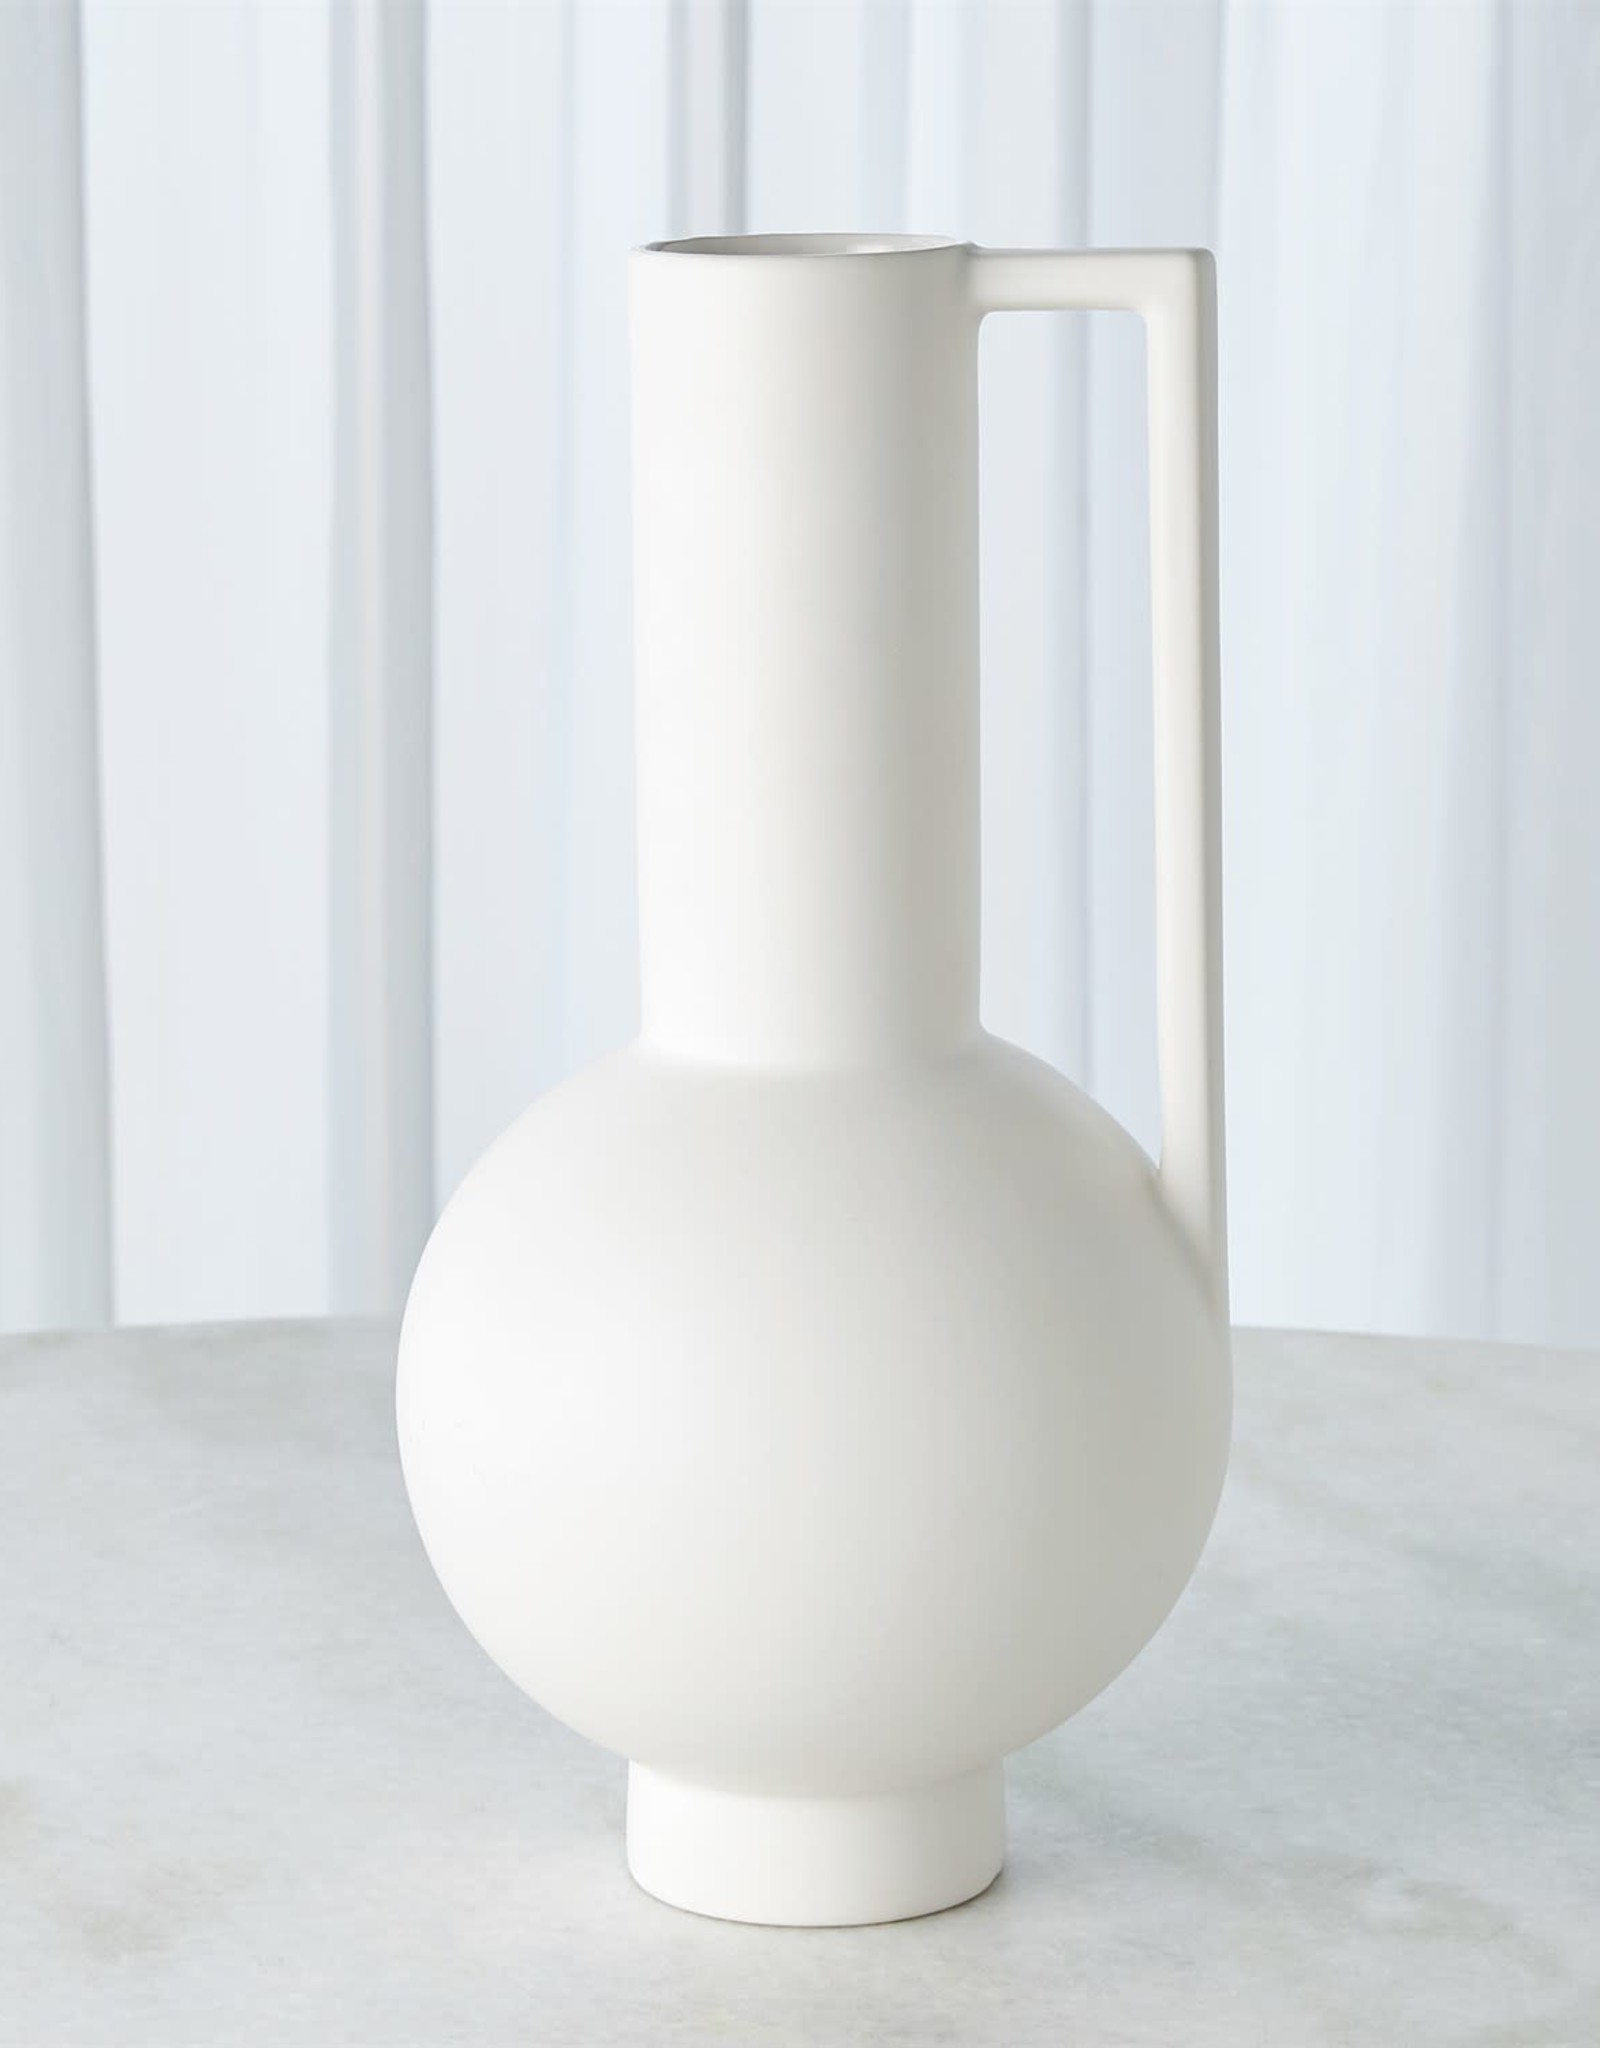 Classic Matte White Pitcher with Handle Reg $299 Now $99